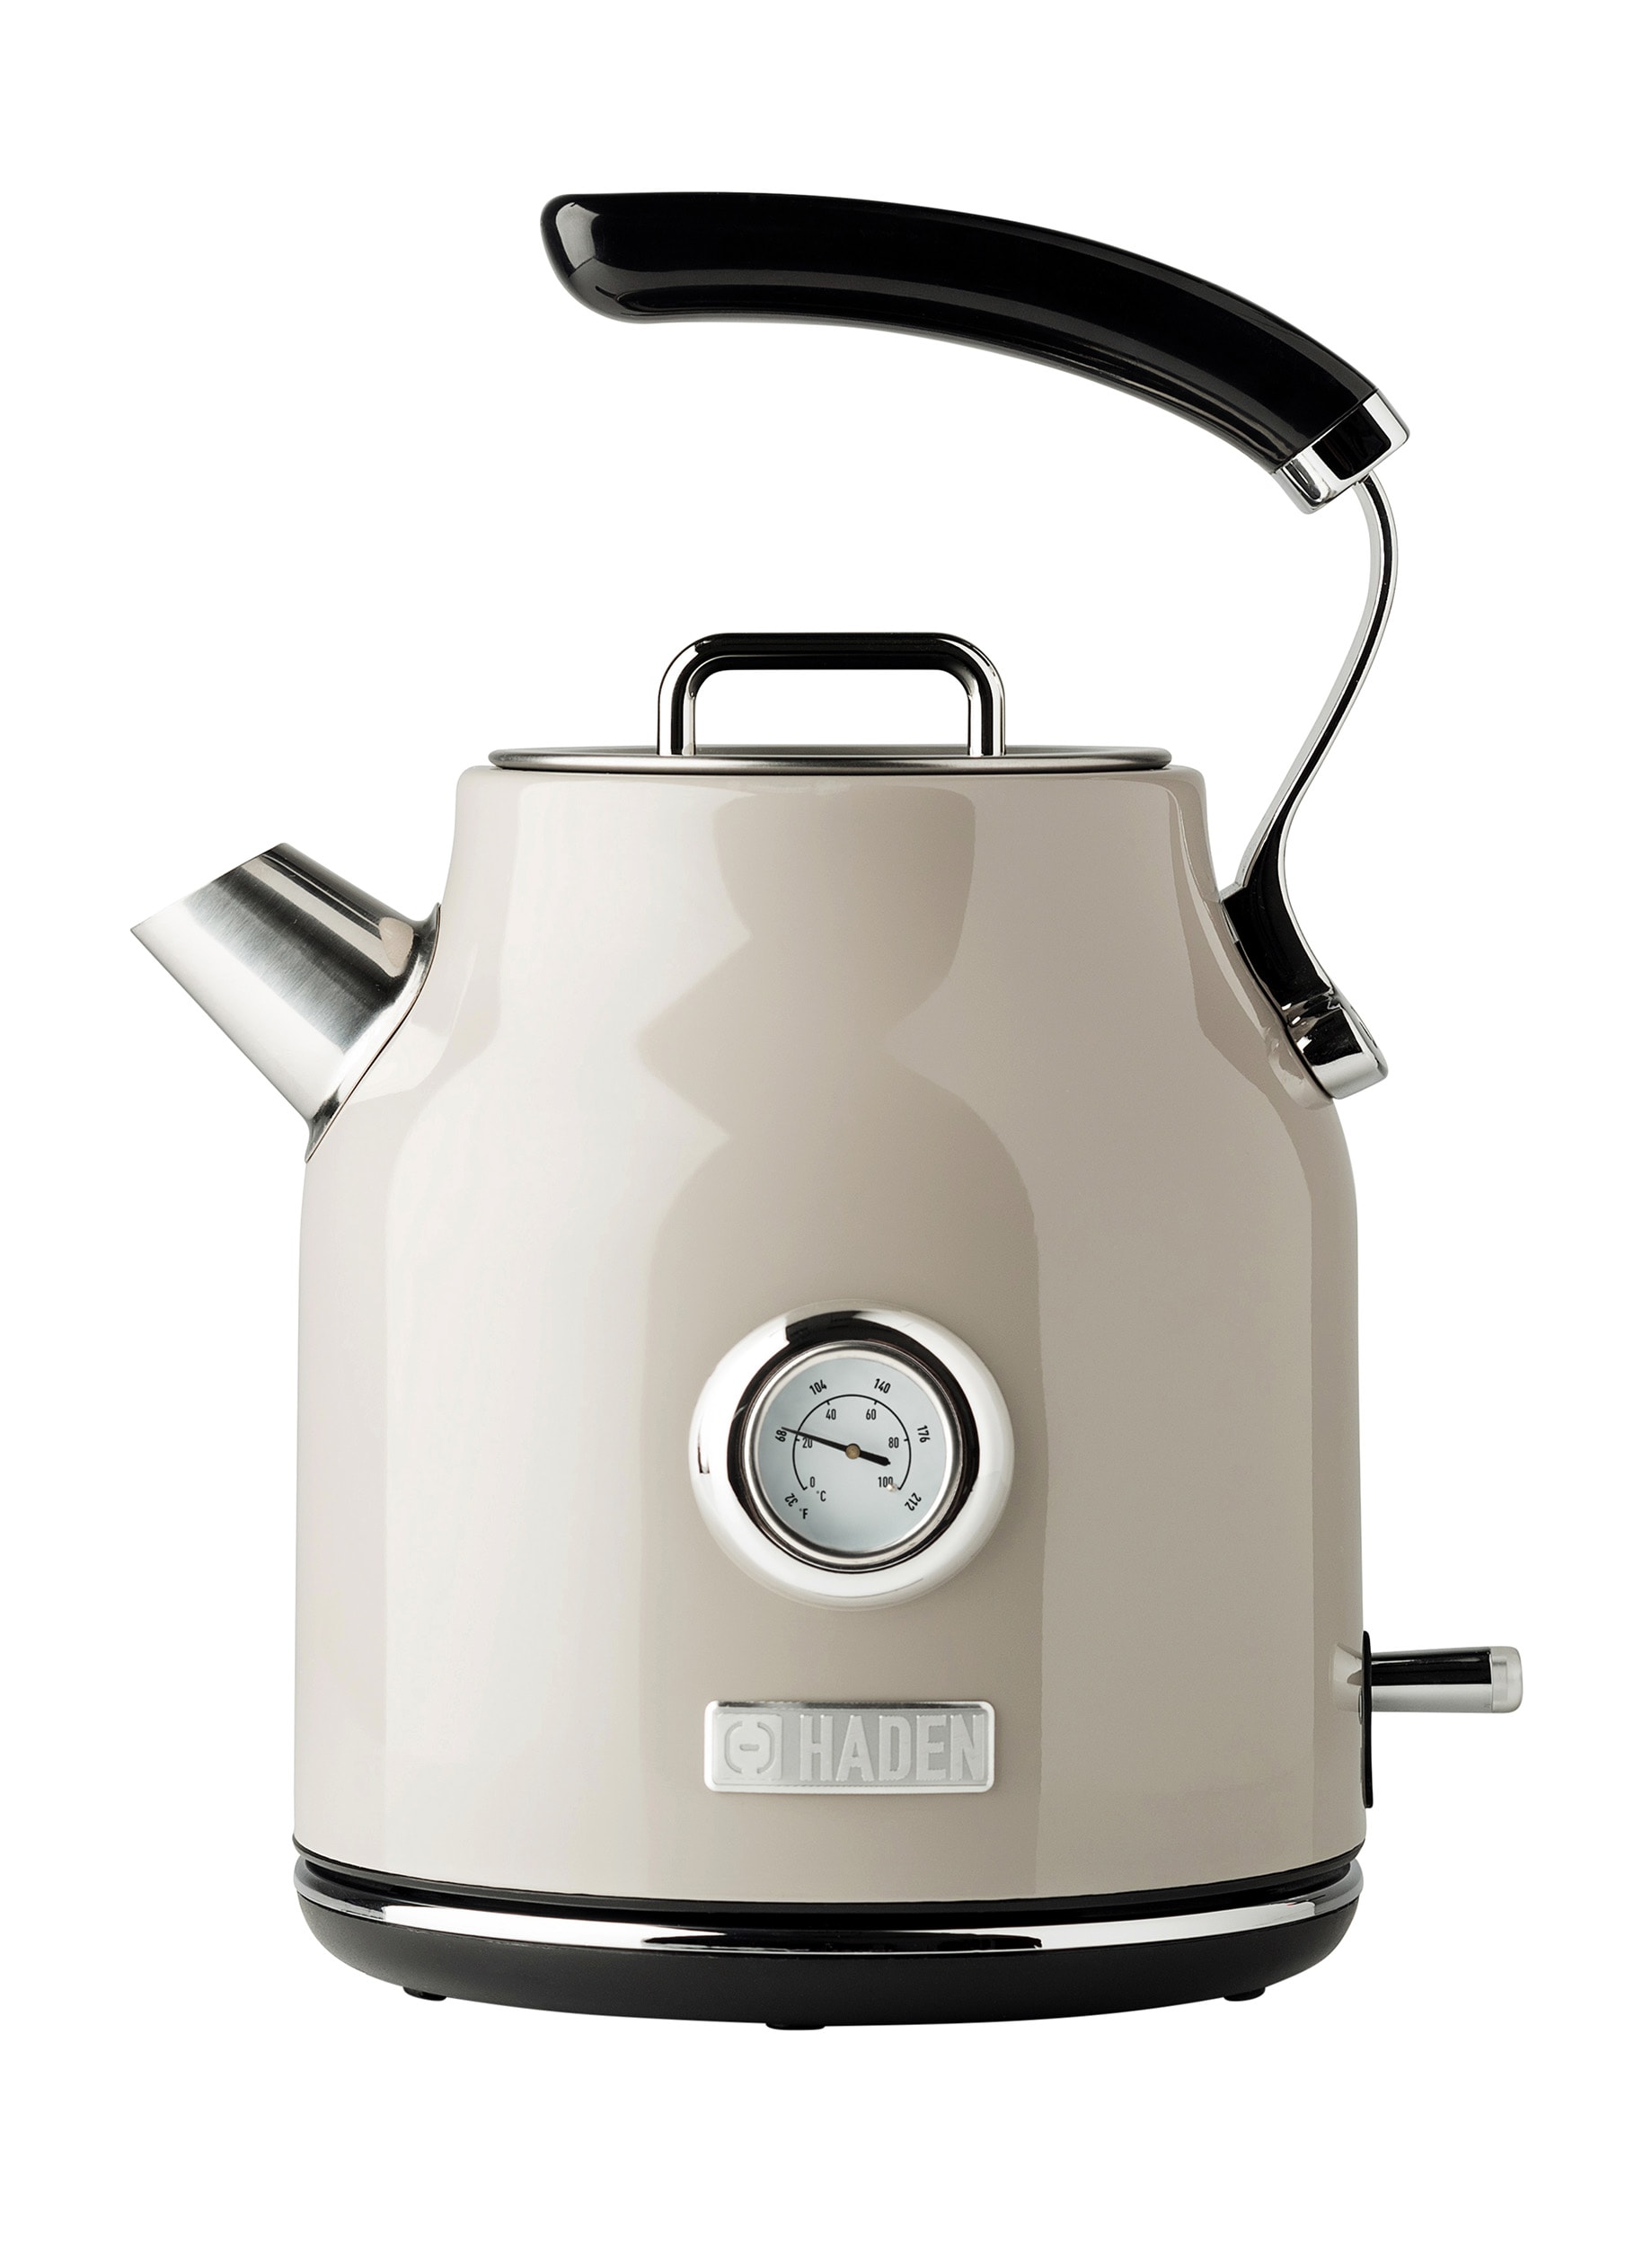 Haden 75043 Heritage 1.7 Liter (7 Cup) Stainless Steel Electric Kettle with  Auto Shut-Off and Boil Dry Protection, English Rose